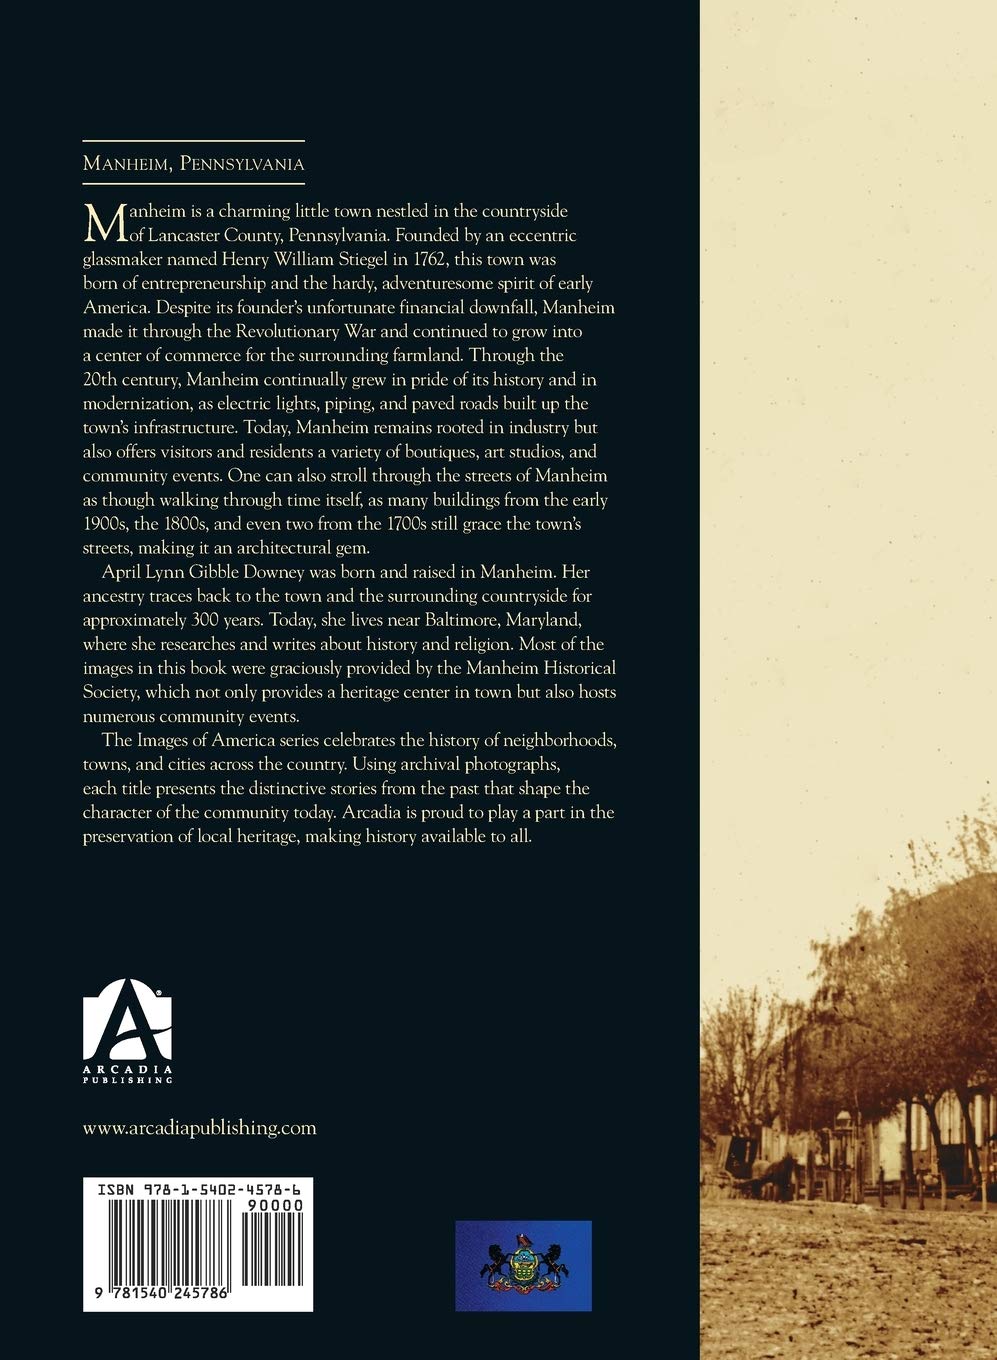 New book for sale, "Images of America: Manheim" by April Lynn Downey, published by Arcadia Publishing, a history of Manheim, Pennsylvania, a pre-revolution town. View of back cover.